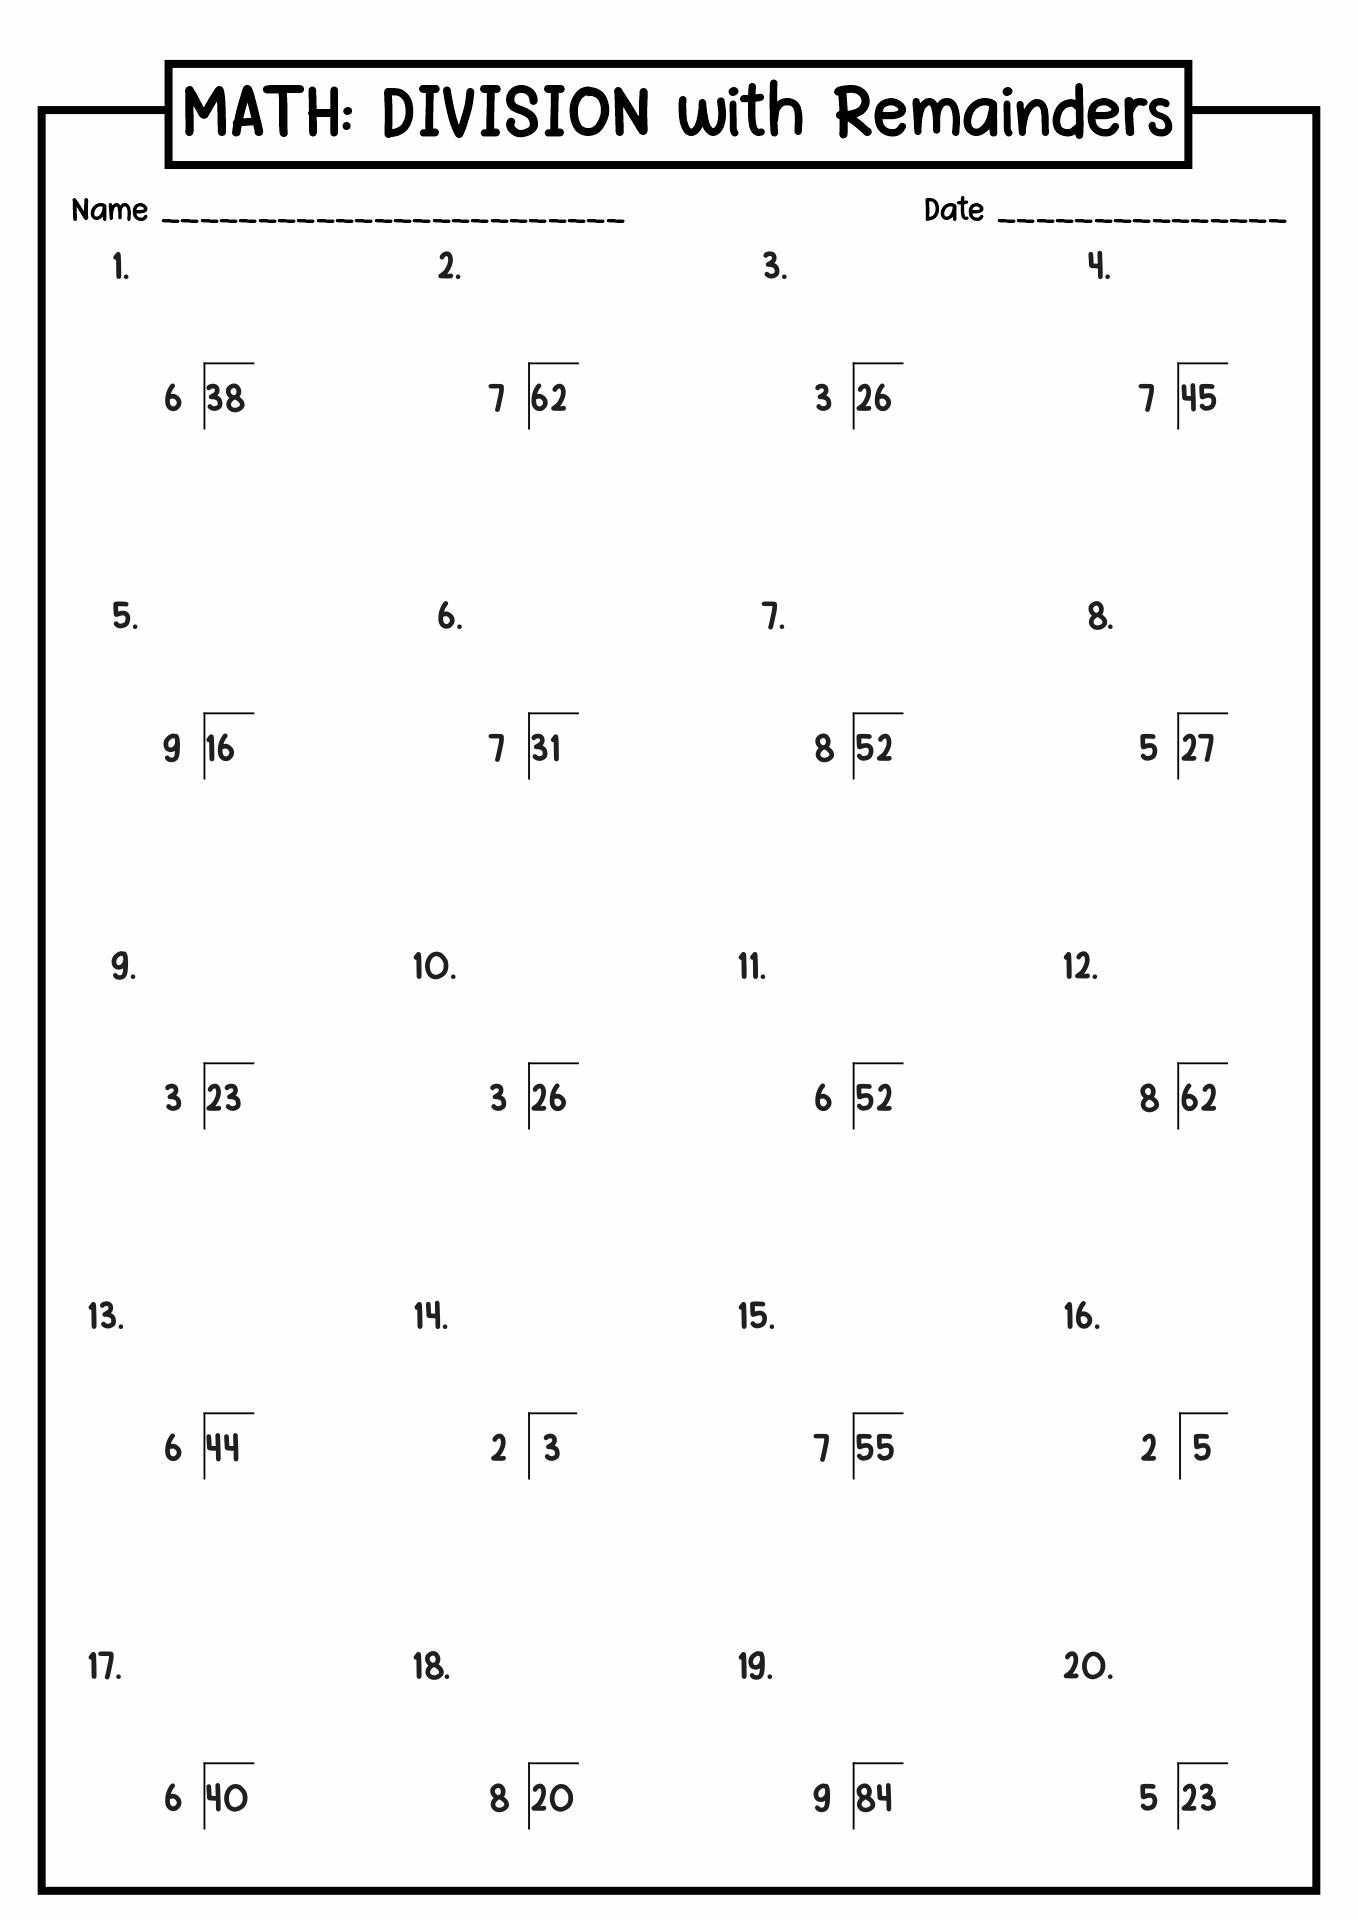 Division with Remainders Worksheets Image